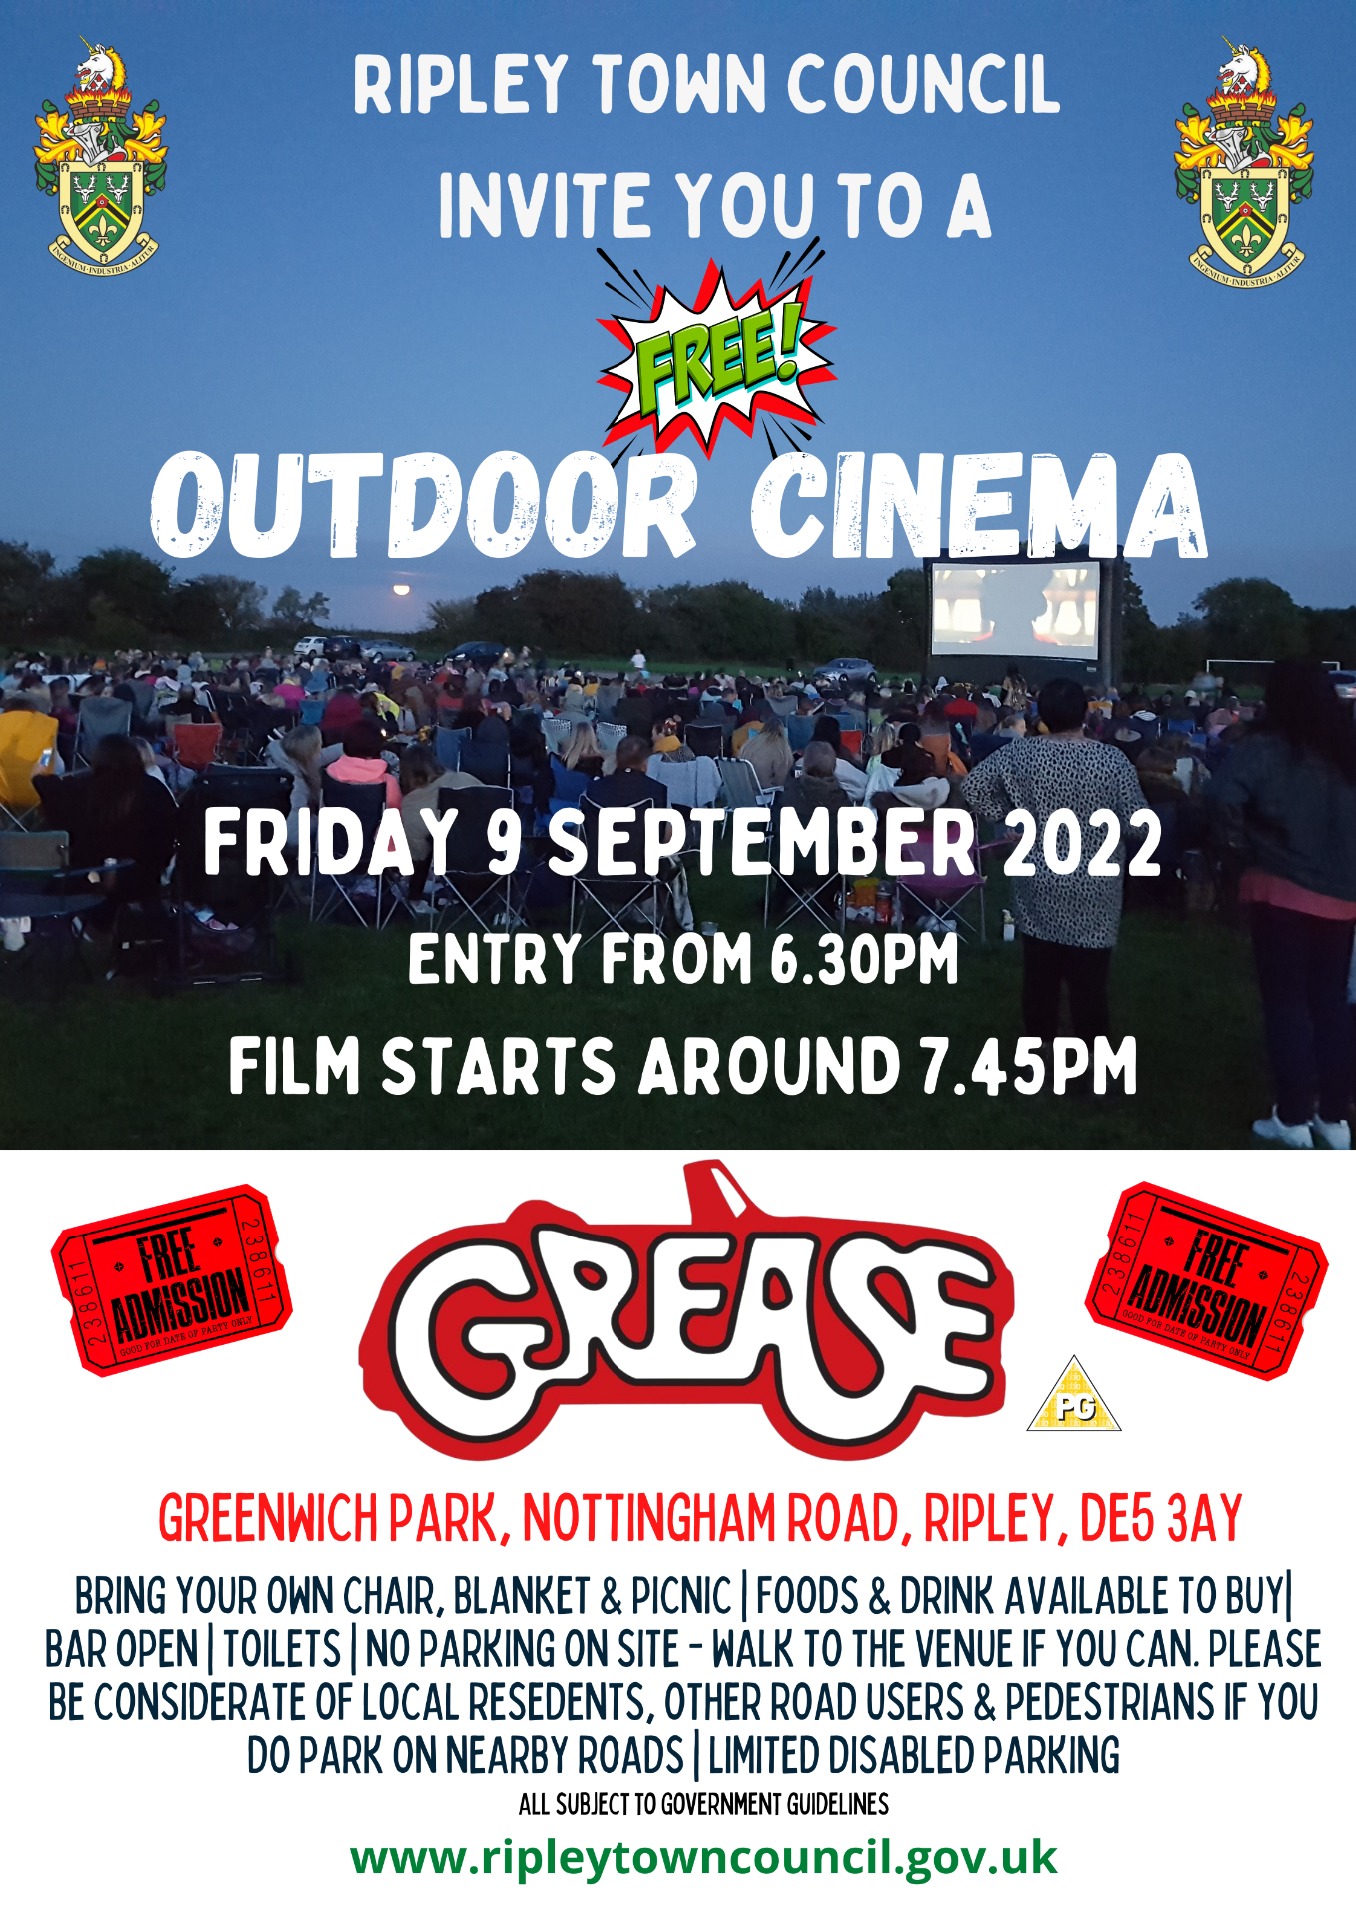 Ripley Outdoor Cinema poster advertising a free showing of Grease